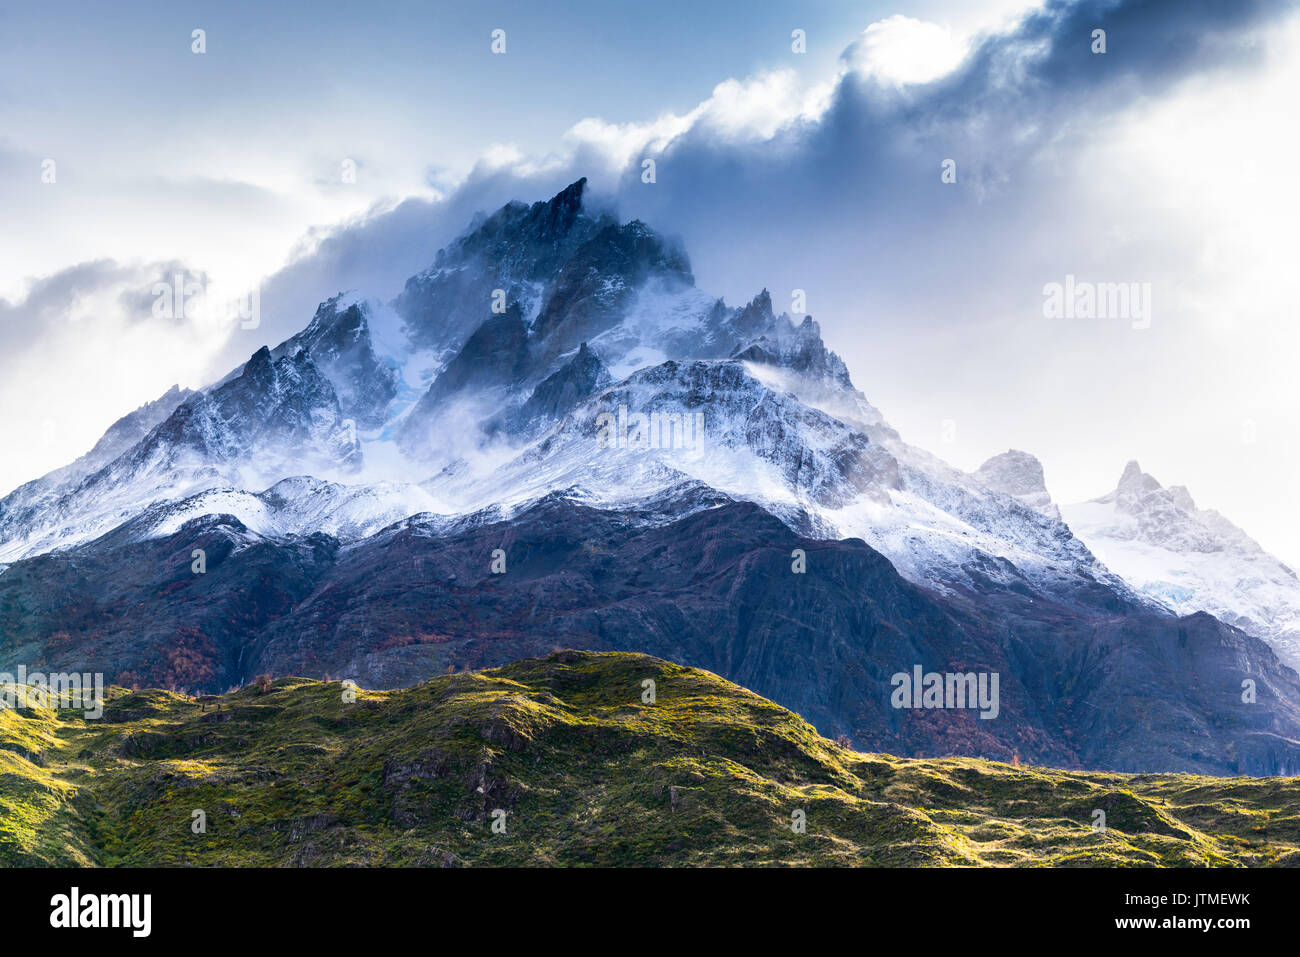 Torres del Paine, Chile - Patagonia landscape with Andes Mountains in austral emisphere. Magellanes Region. Stock Photo